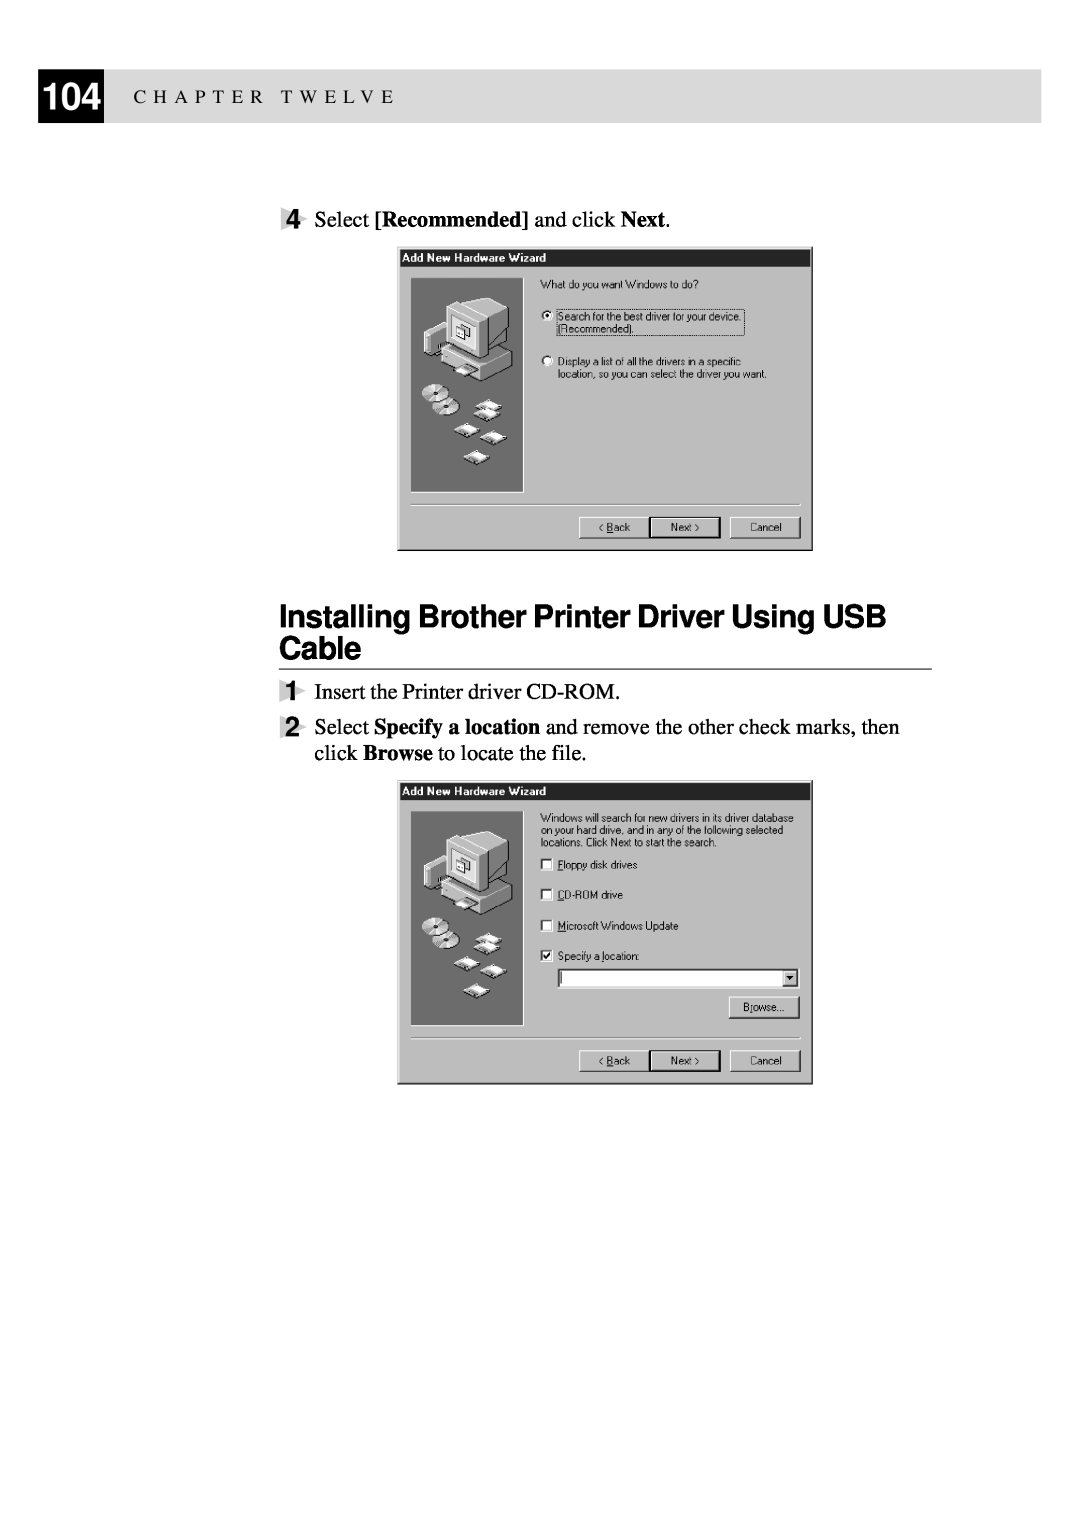 Brother FAX-8350P, MFC-9650 owner manual Installing Brother Printer Driver Using USB Cable, C H A P T E R T W E L V E 